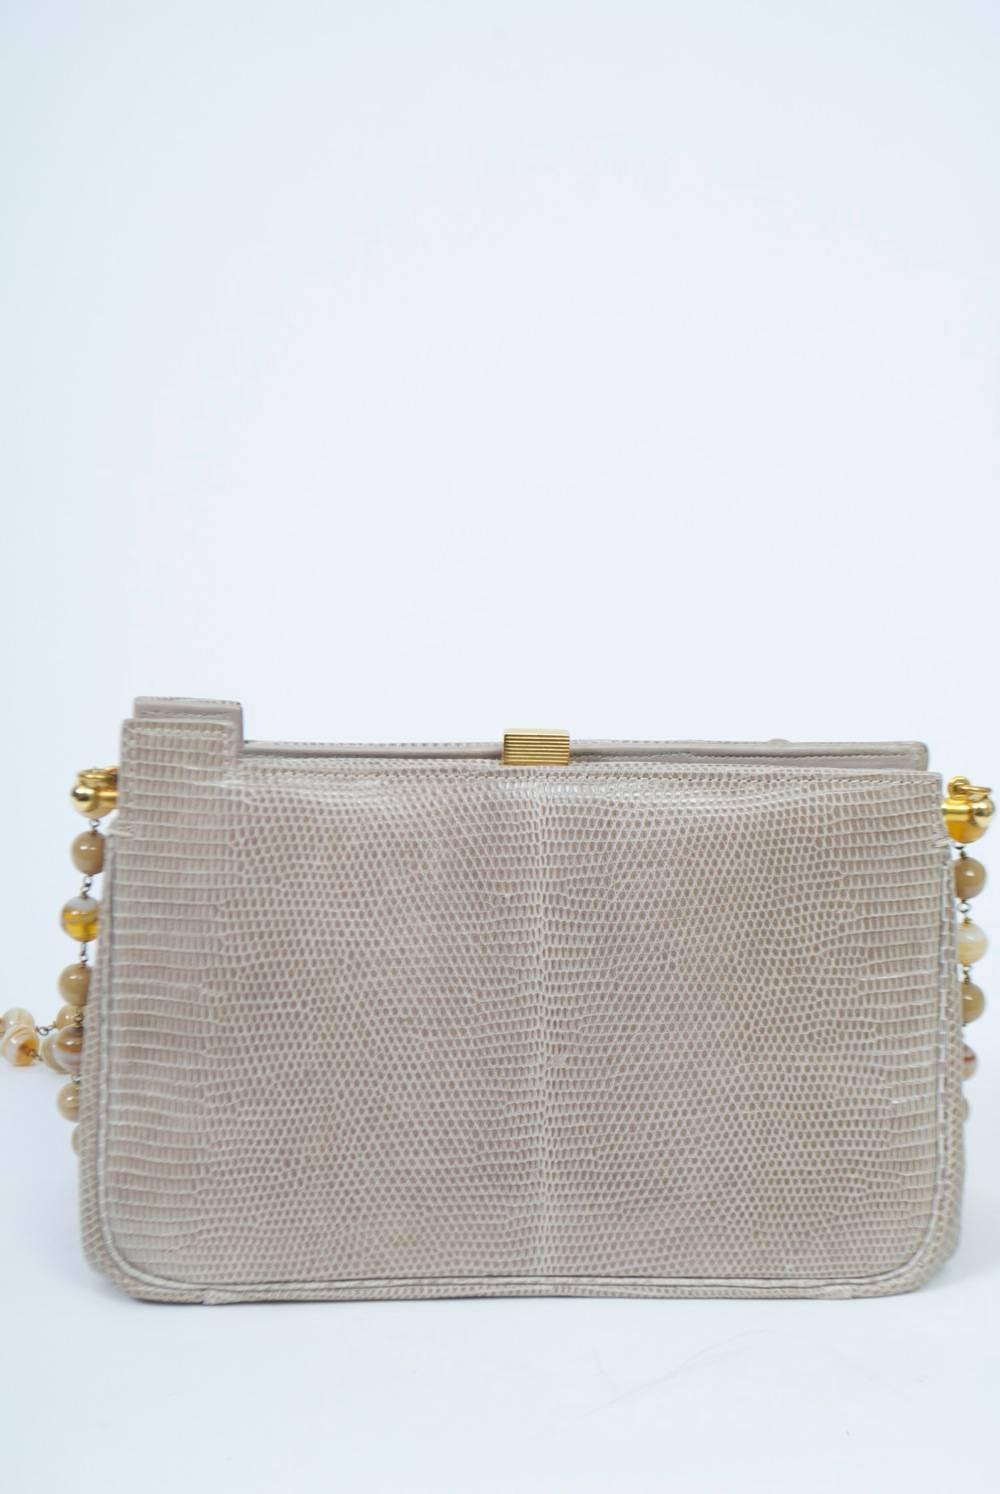 Love this bag! Meticulously crafted of taupe lizard, the structured handbag features a shoulder strap of complementary beads accented by dangling rhinestone-studded wood beads, which motif also embellishes a front corner of the body. Closed